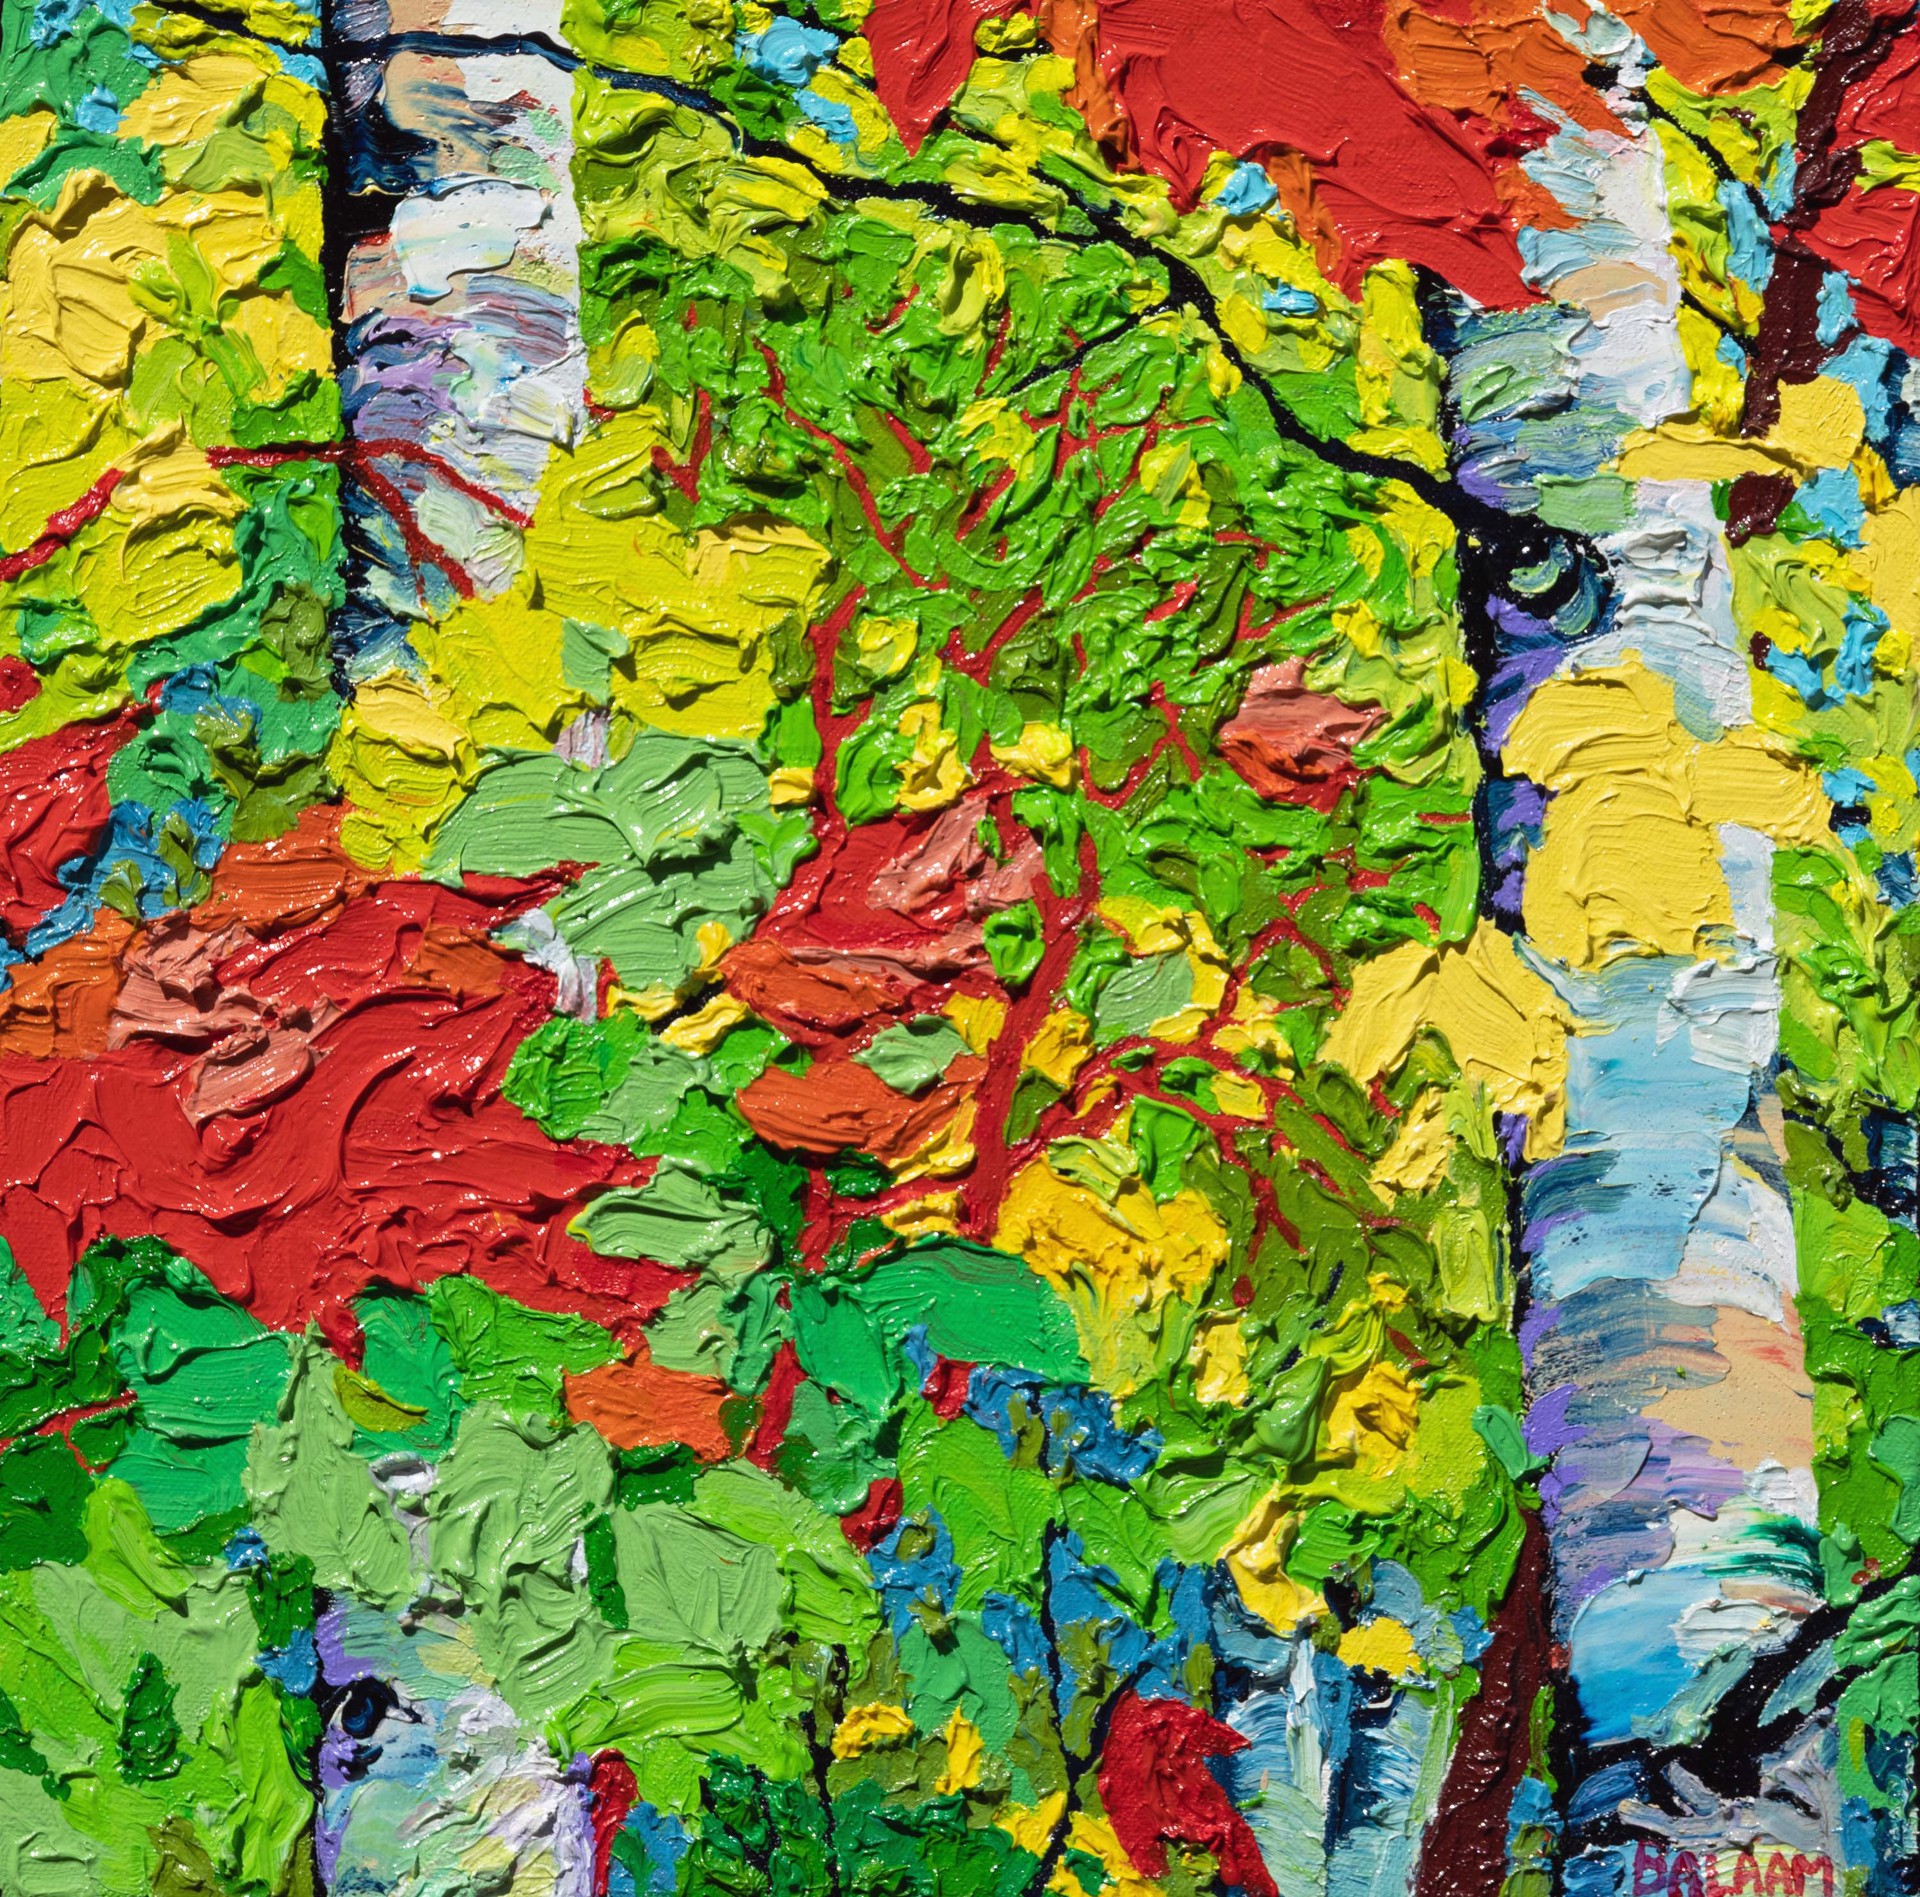 Glimpse - Every Leaf, Every Twig, Every Branch Series - Floating Maples & Birches by Frank Balaam